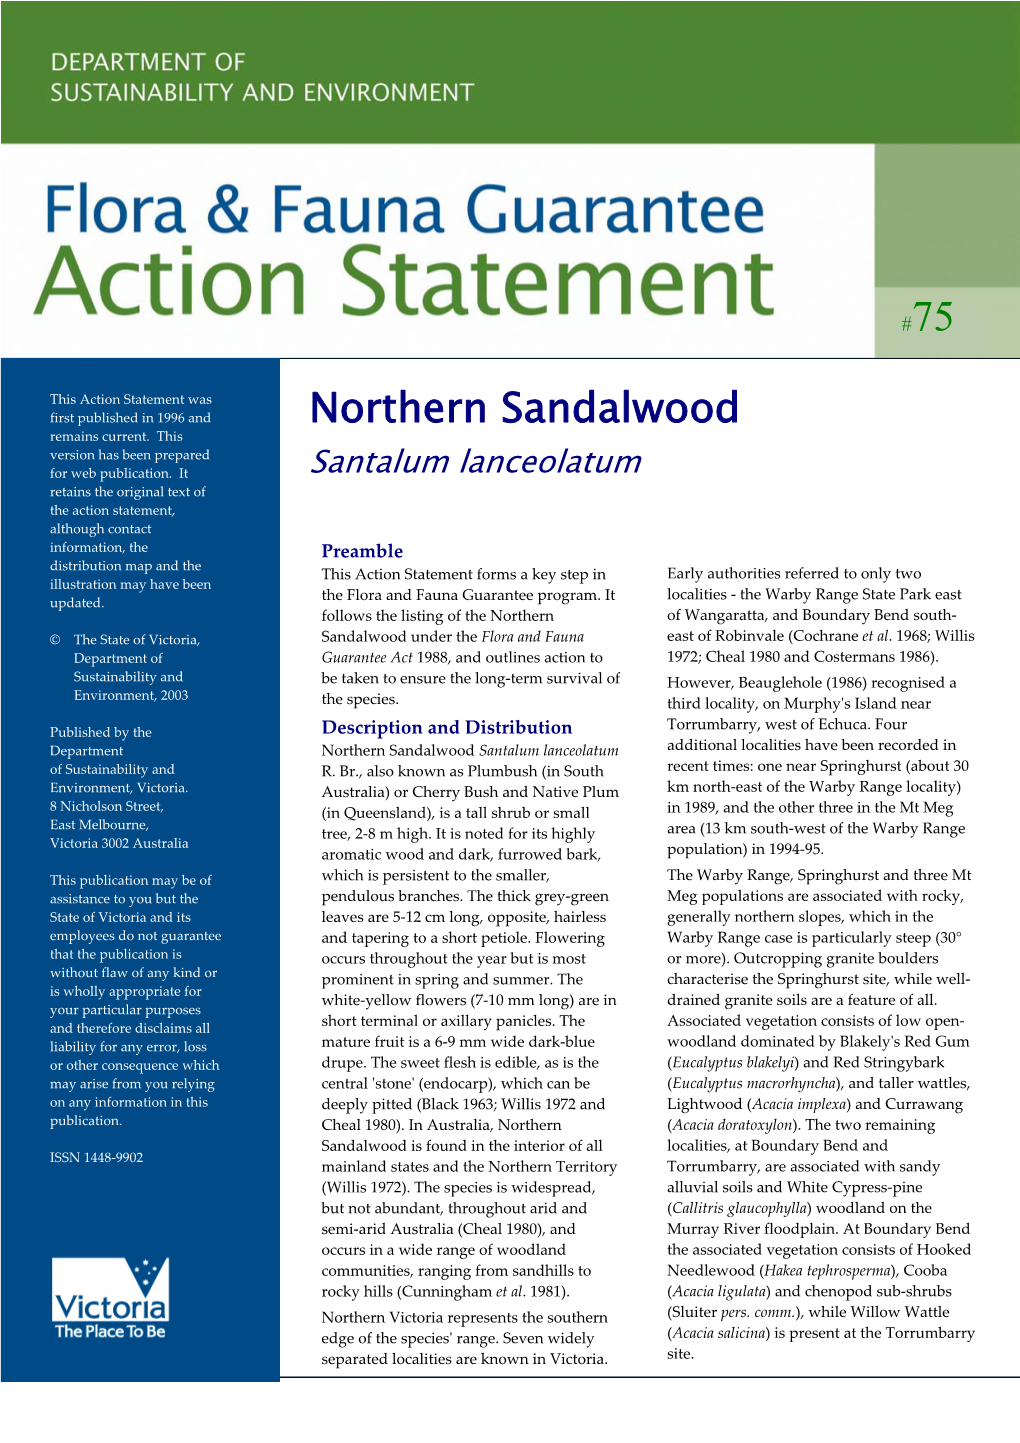 Northern Sandalwood Version Has Been Prepared for Web Publication